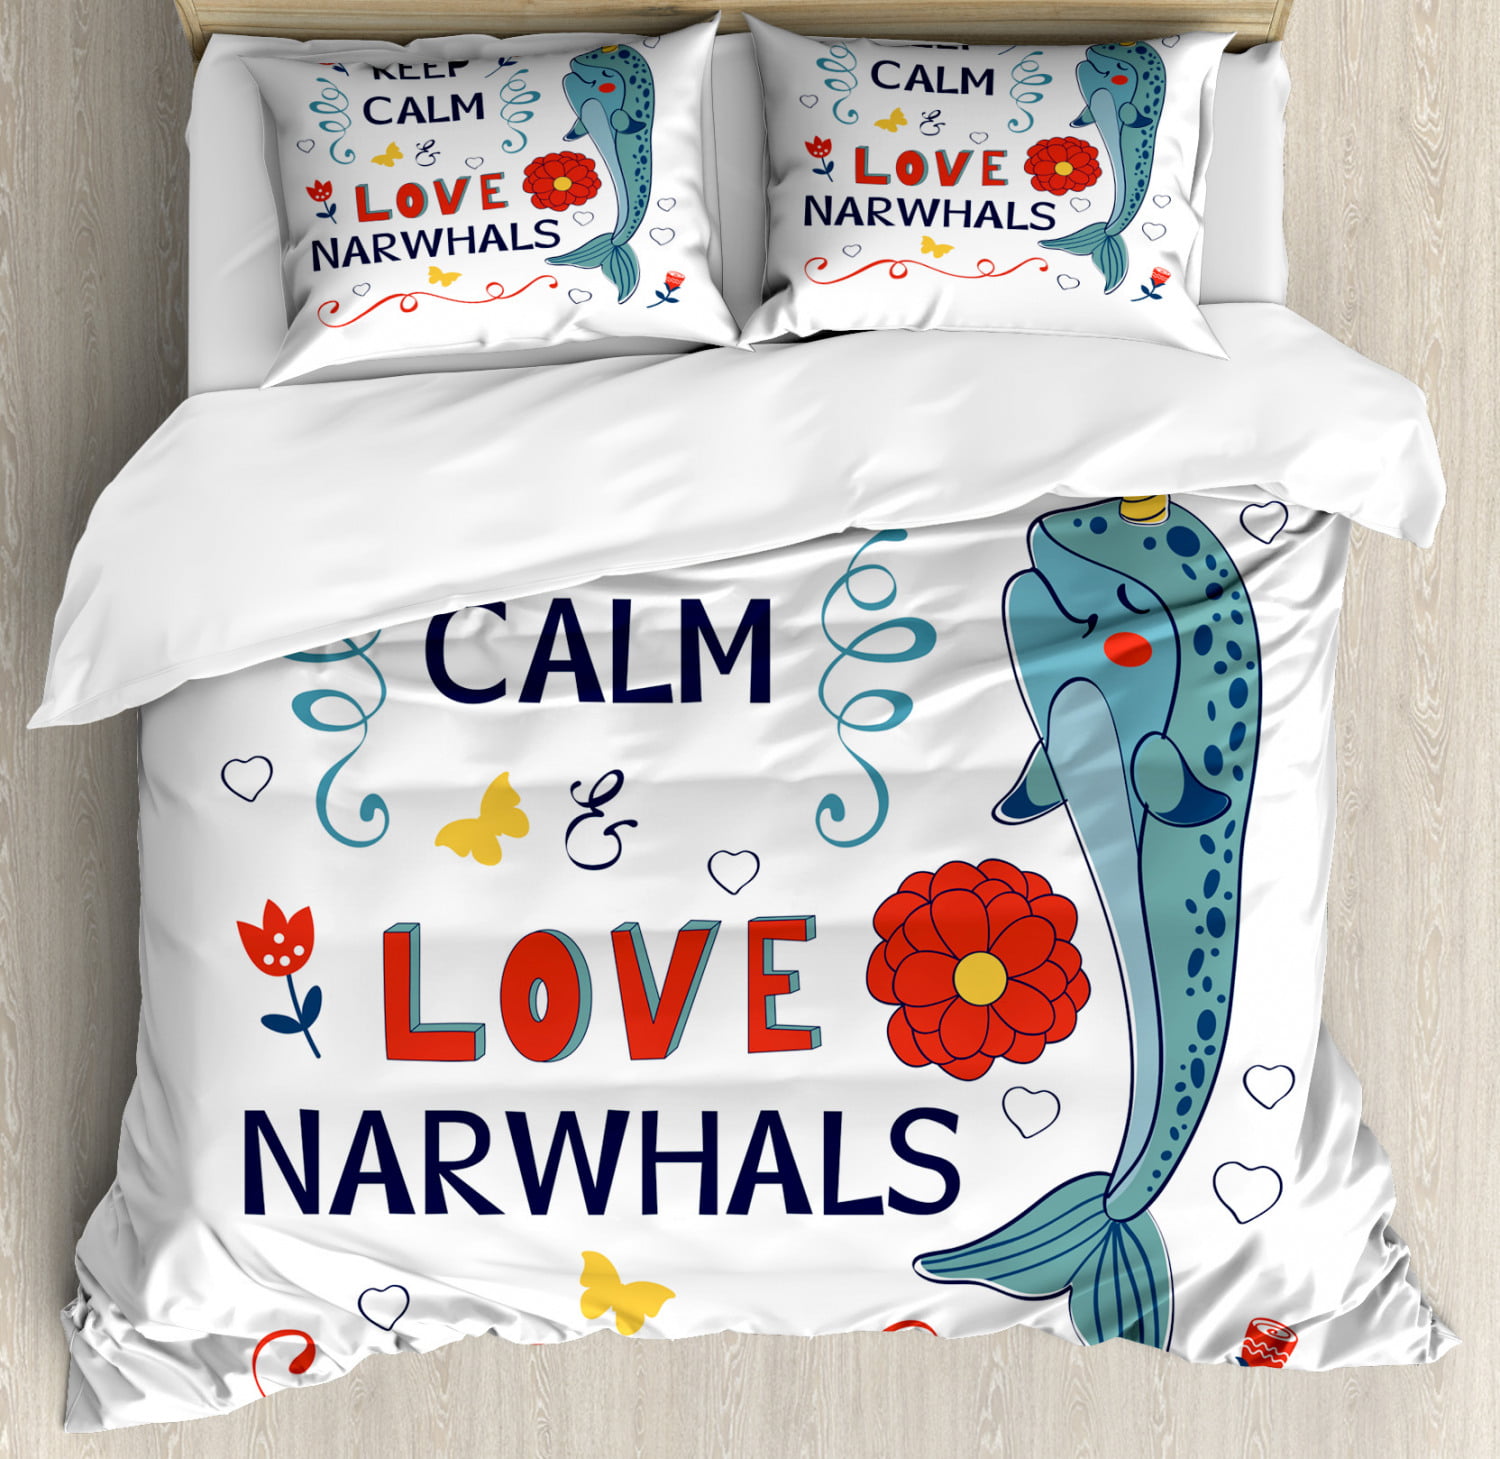 Ambesonne Narwhal Duvet Cover Set Pop Culture Phrase With